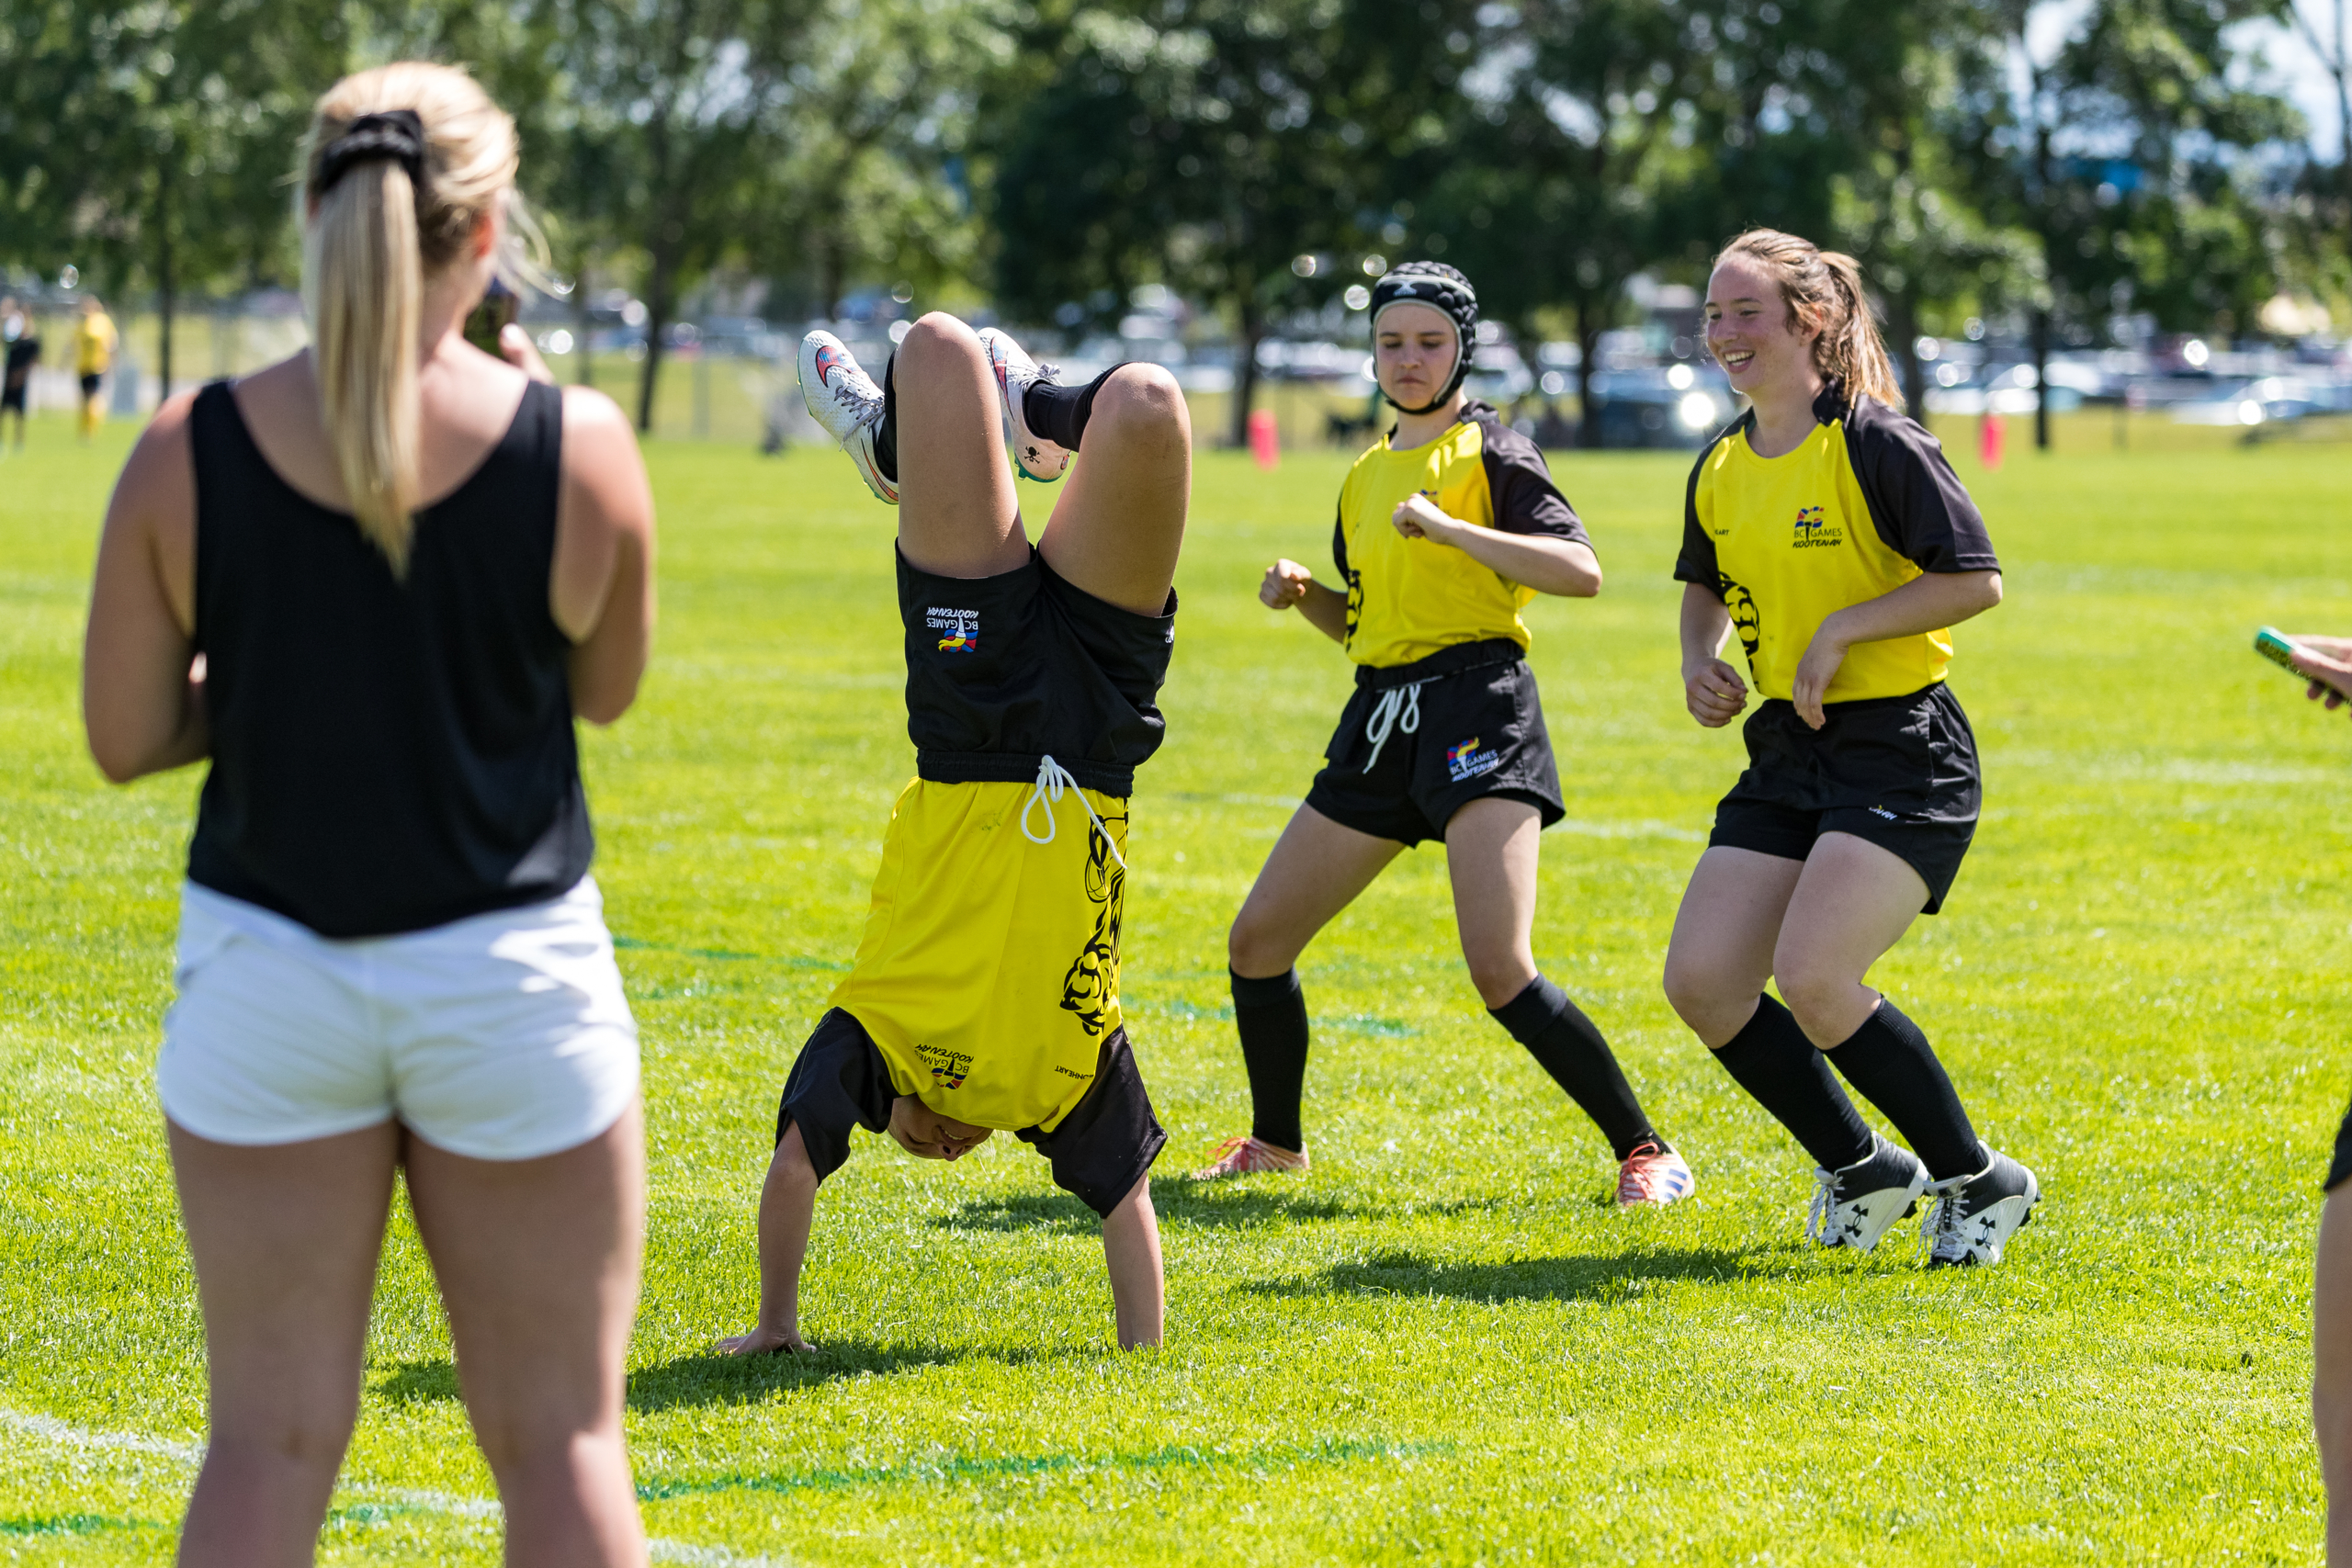 Girls dance during the 2022 BC Summer Games Rugby competition